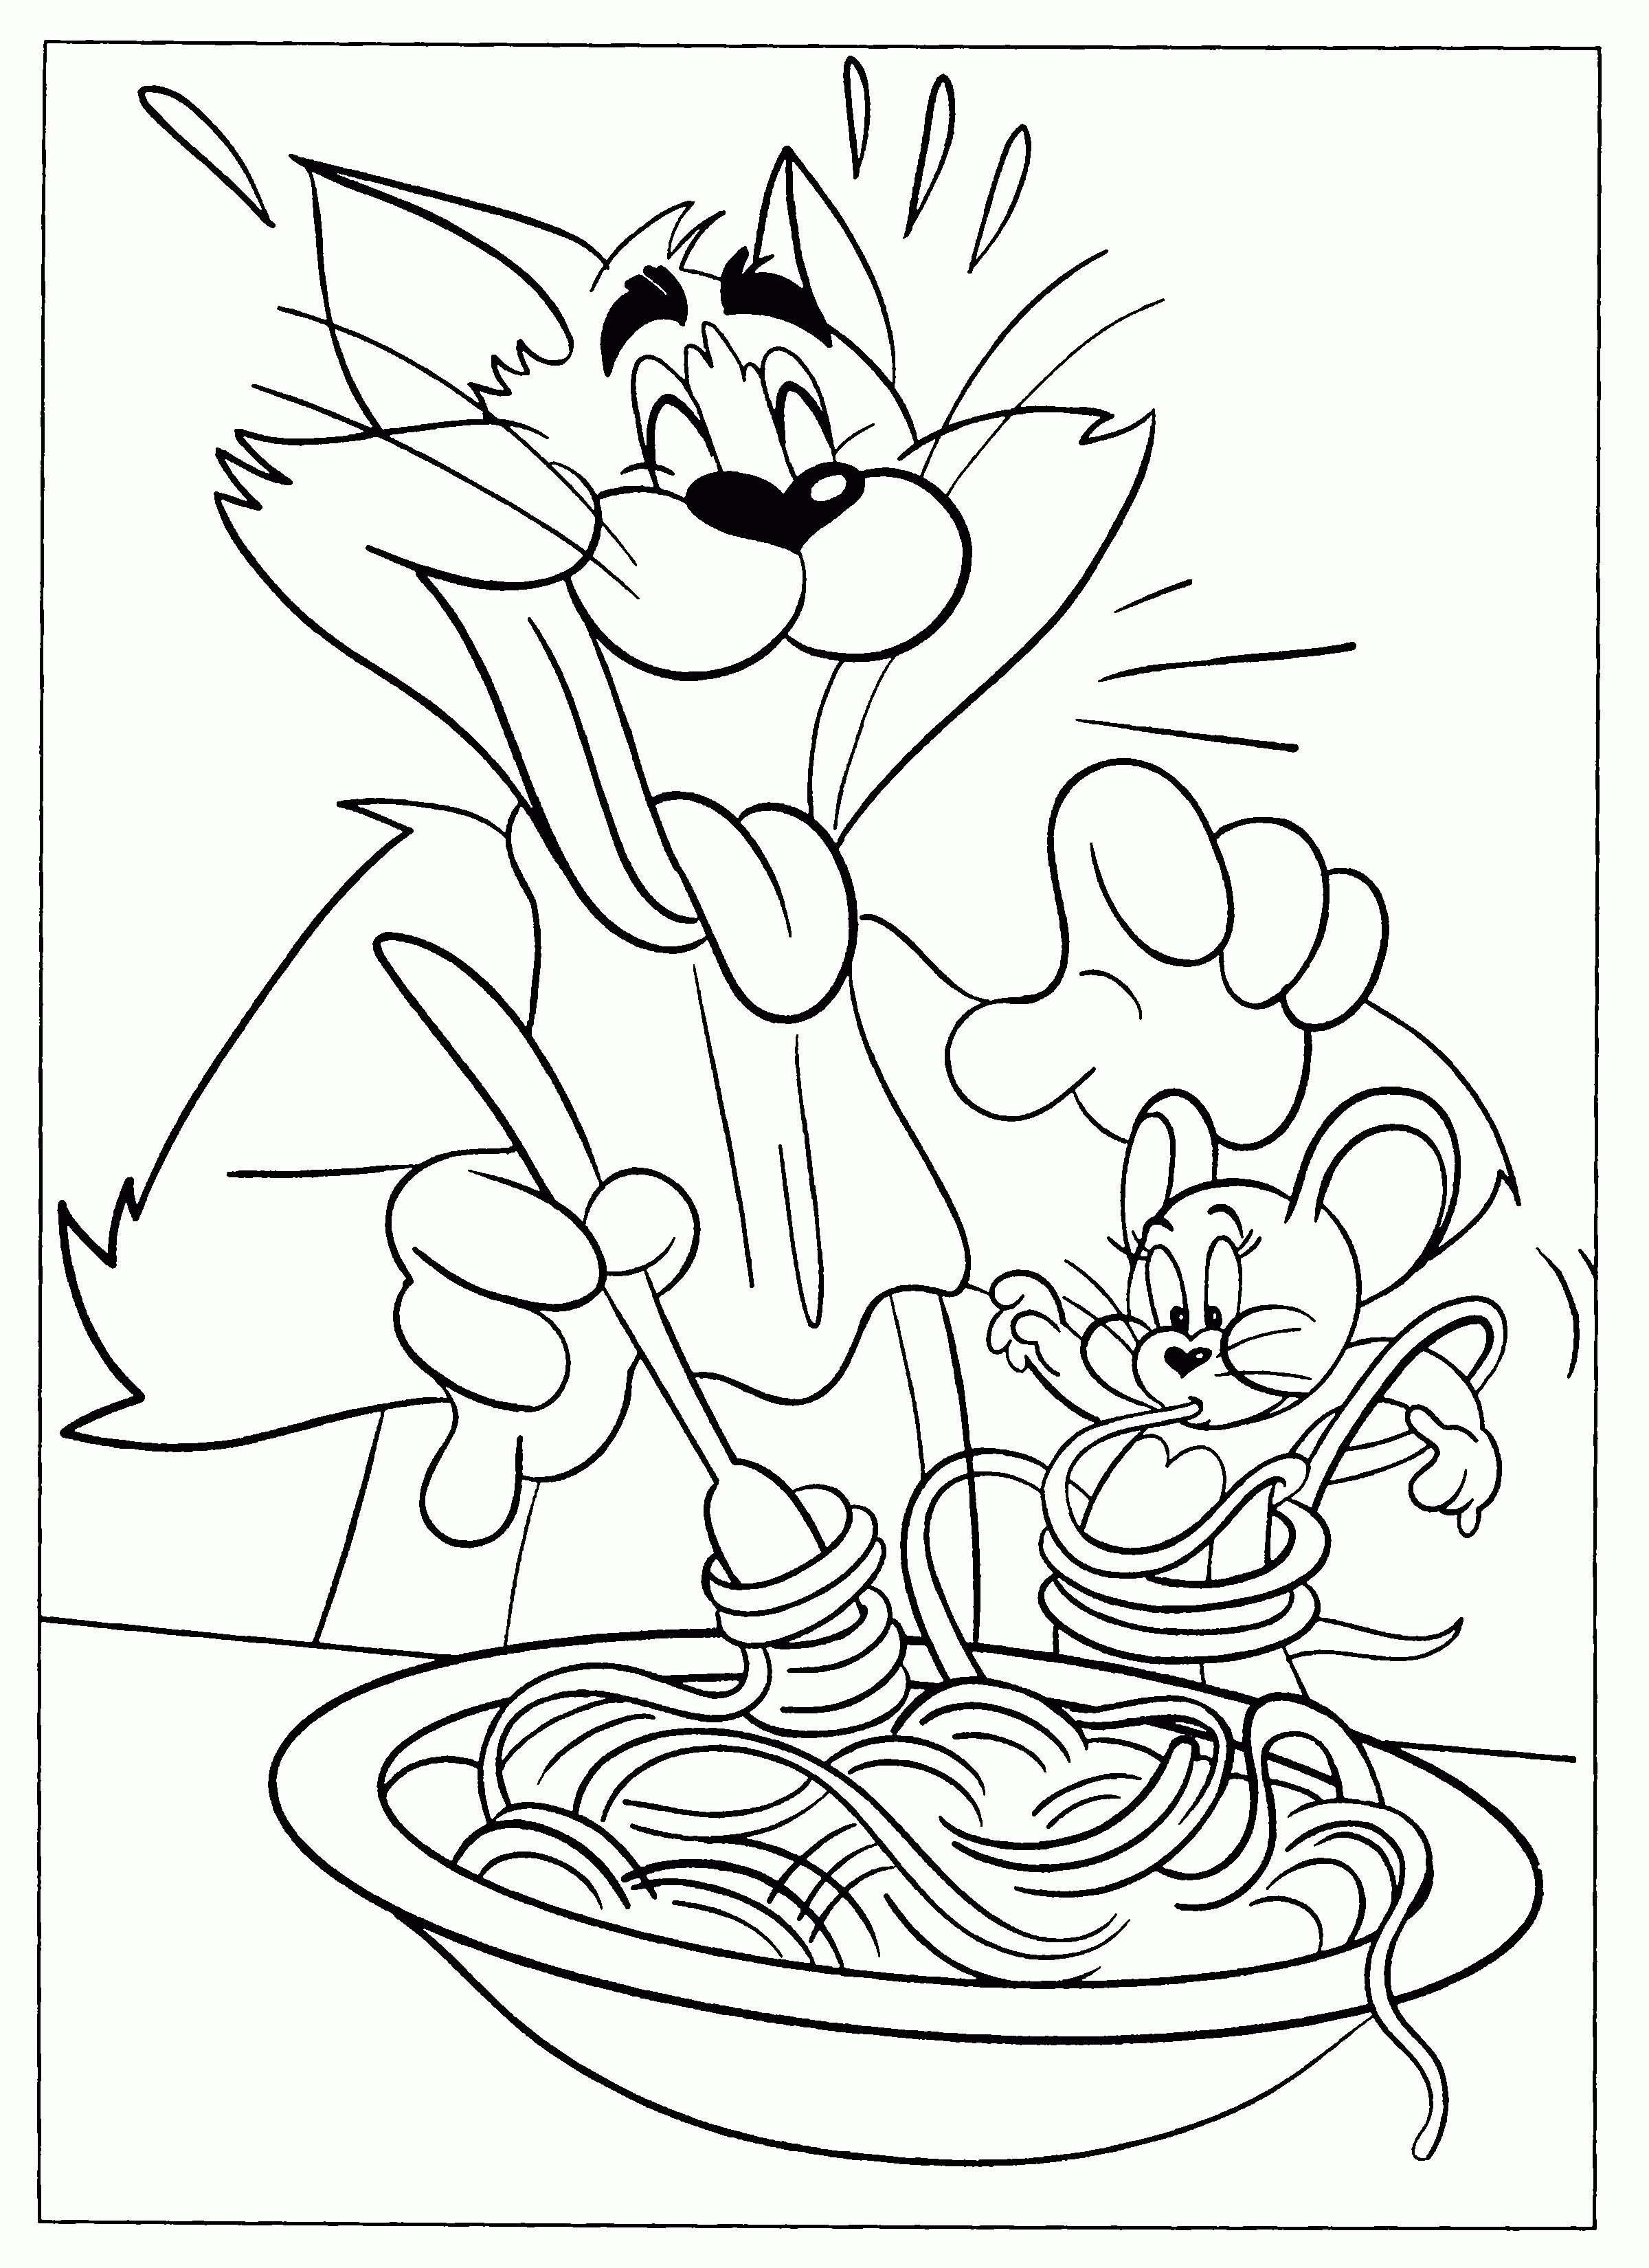 Tom and Jerry Spike Coloring Pages - Free Printable Coloring Sheets